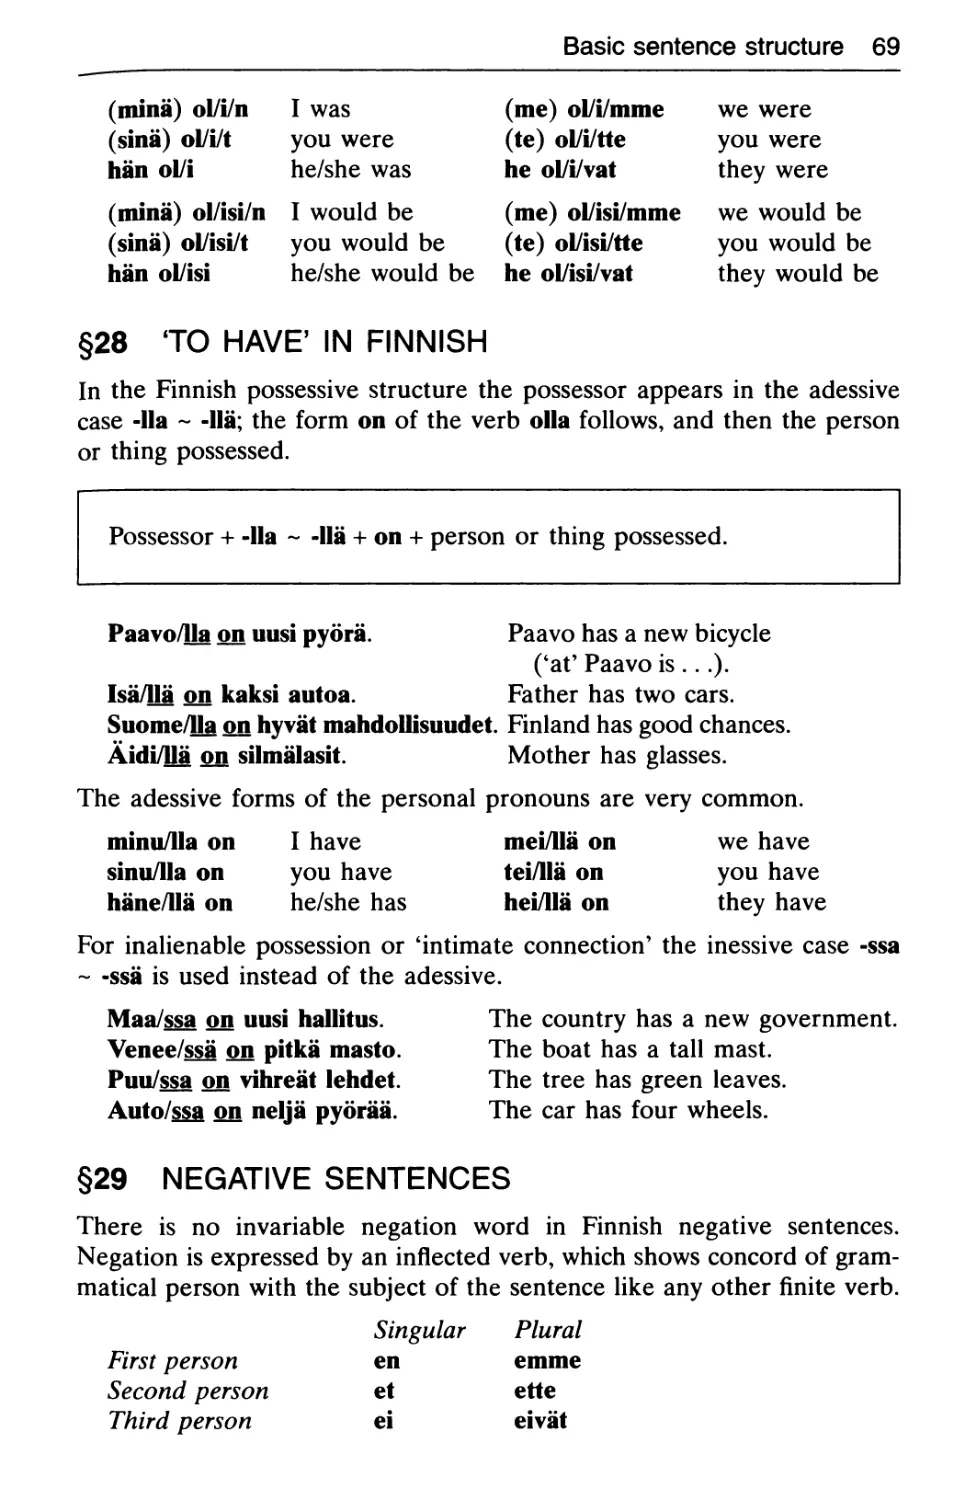 §28 ‘To have’ in Finnish
§29 Negative sentences